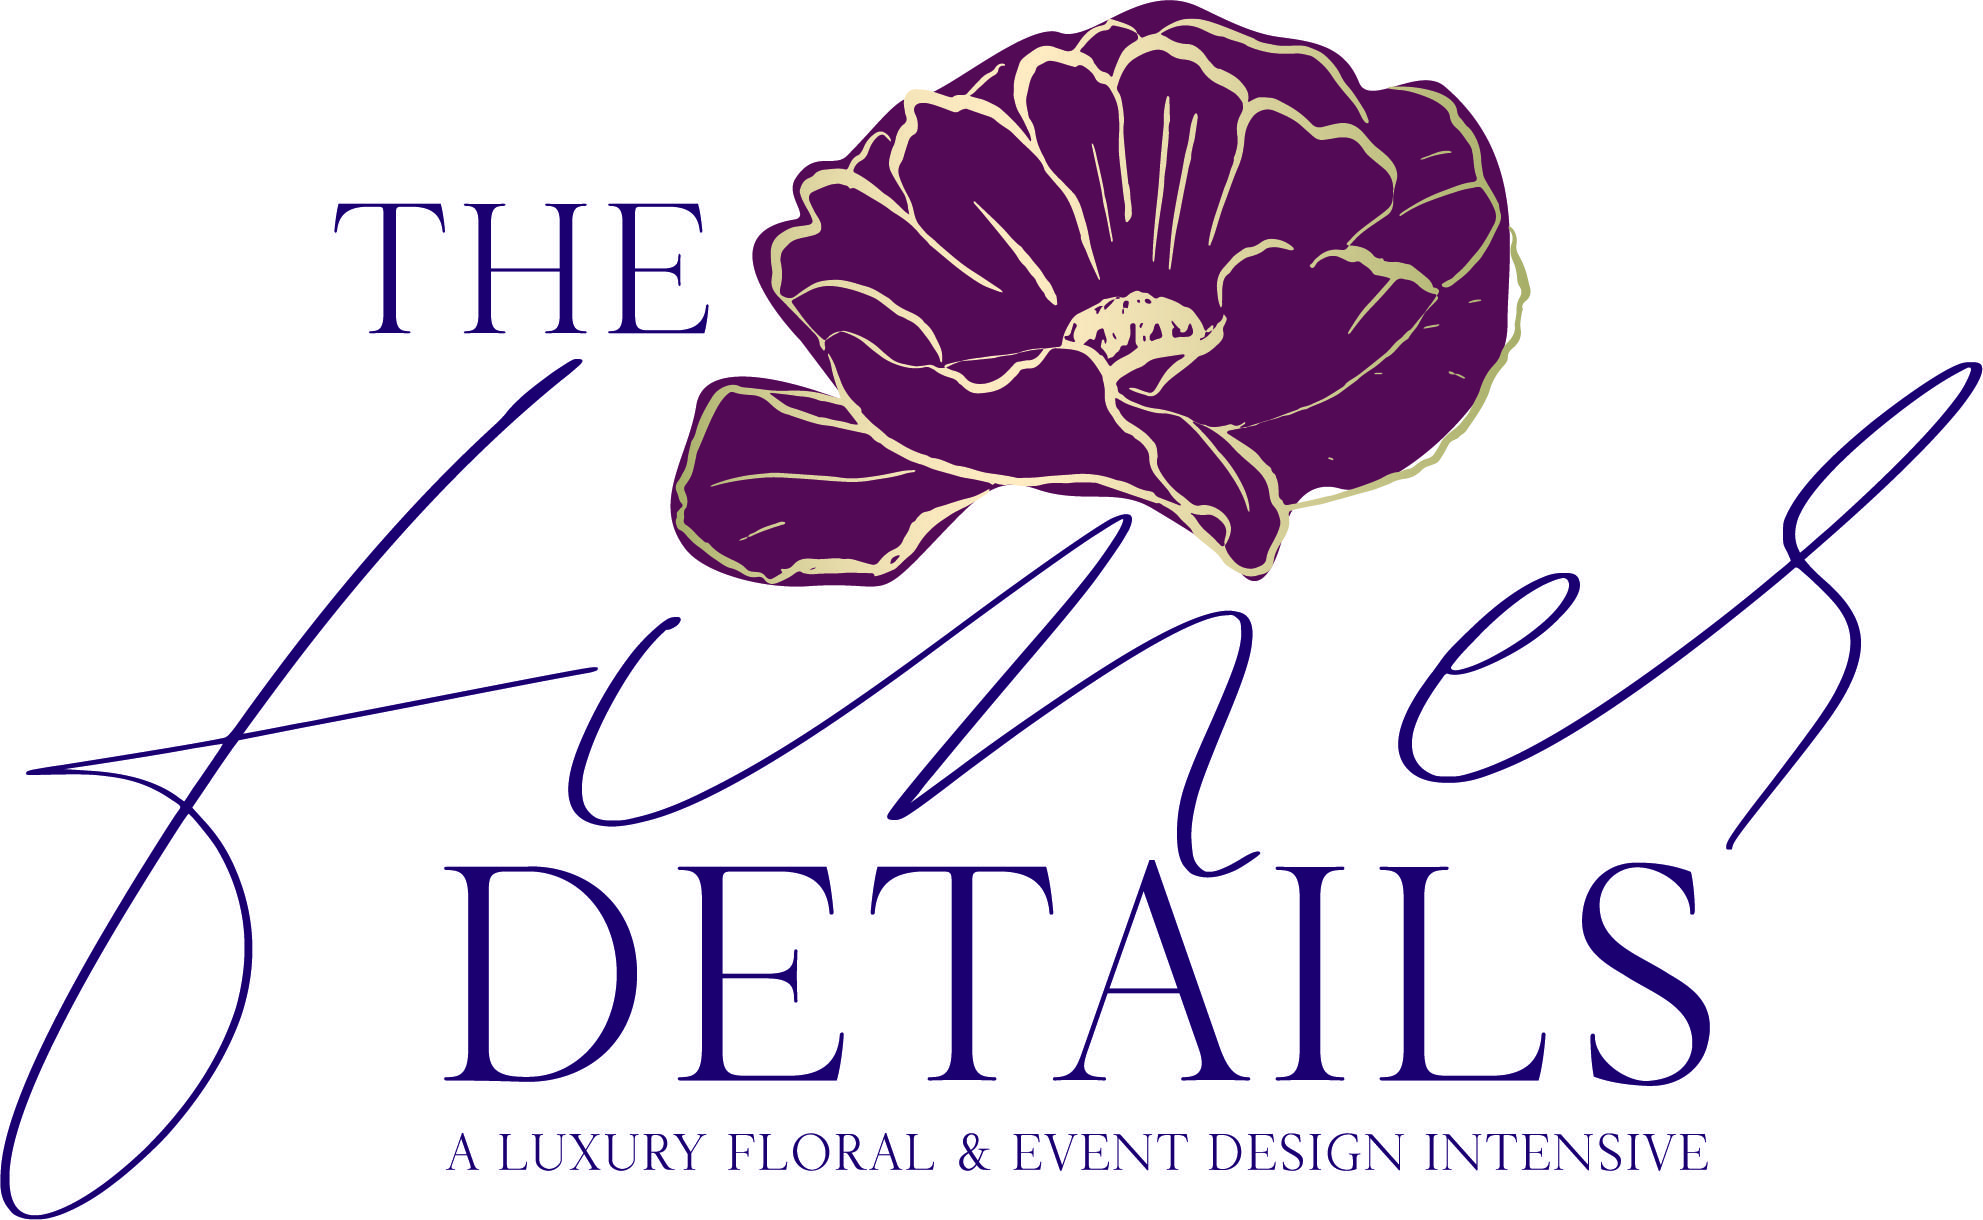 THE FINER DETAILS: A Luxury Floral and Event Design Intensive